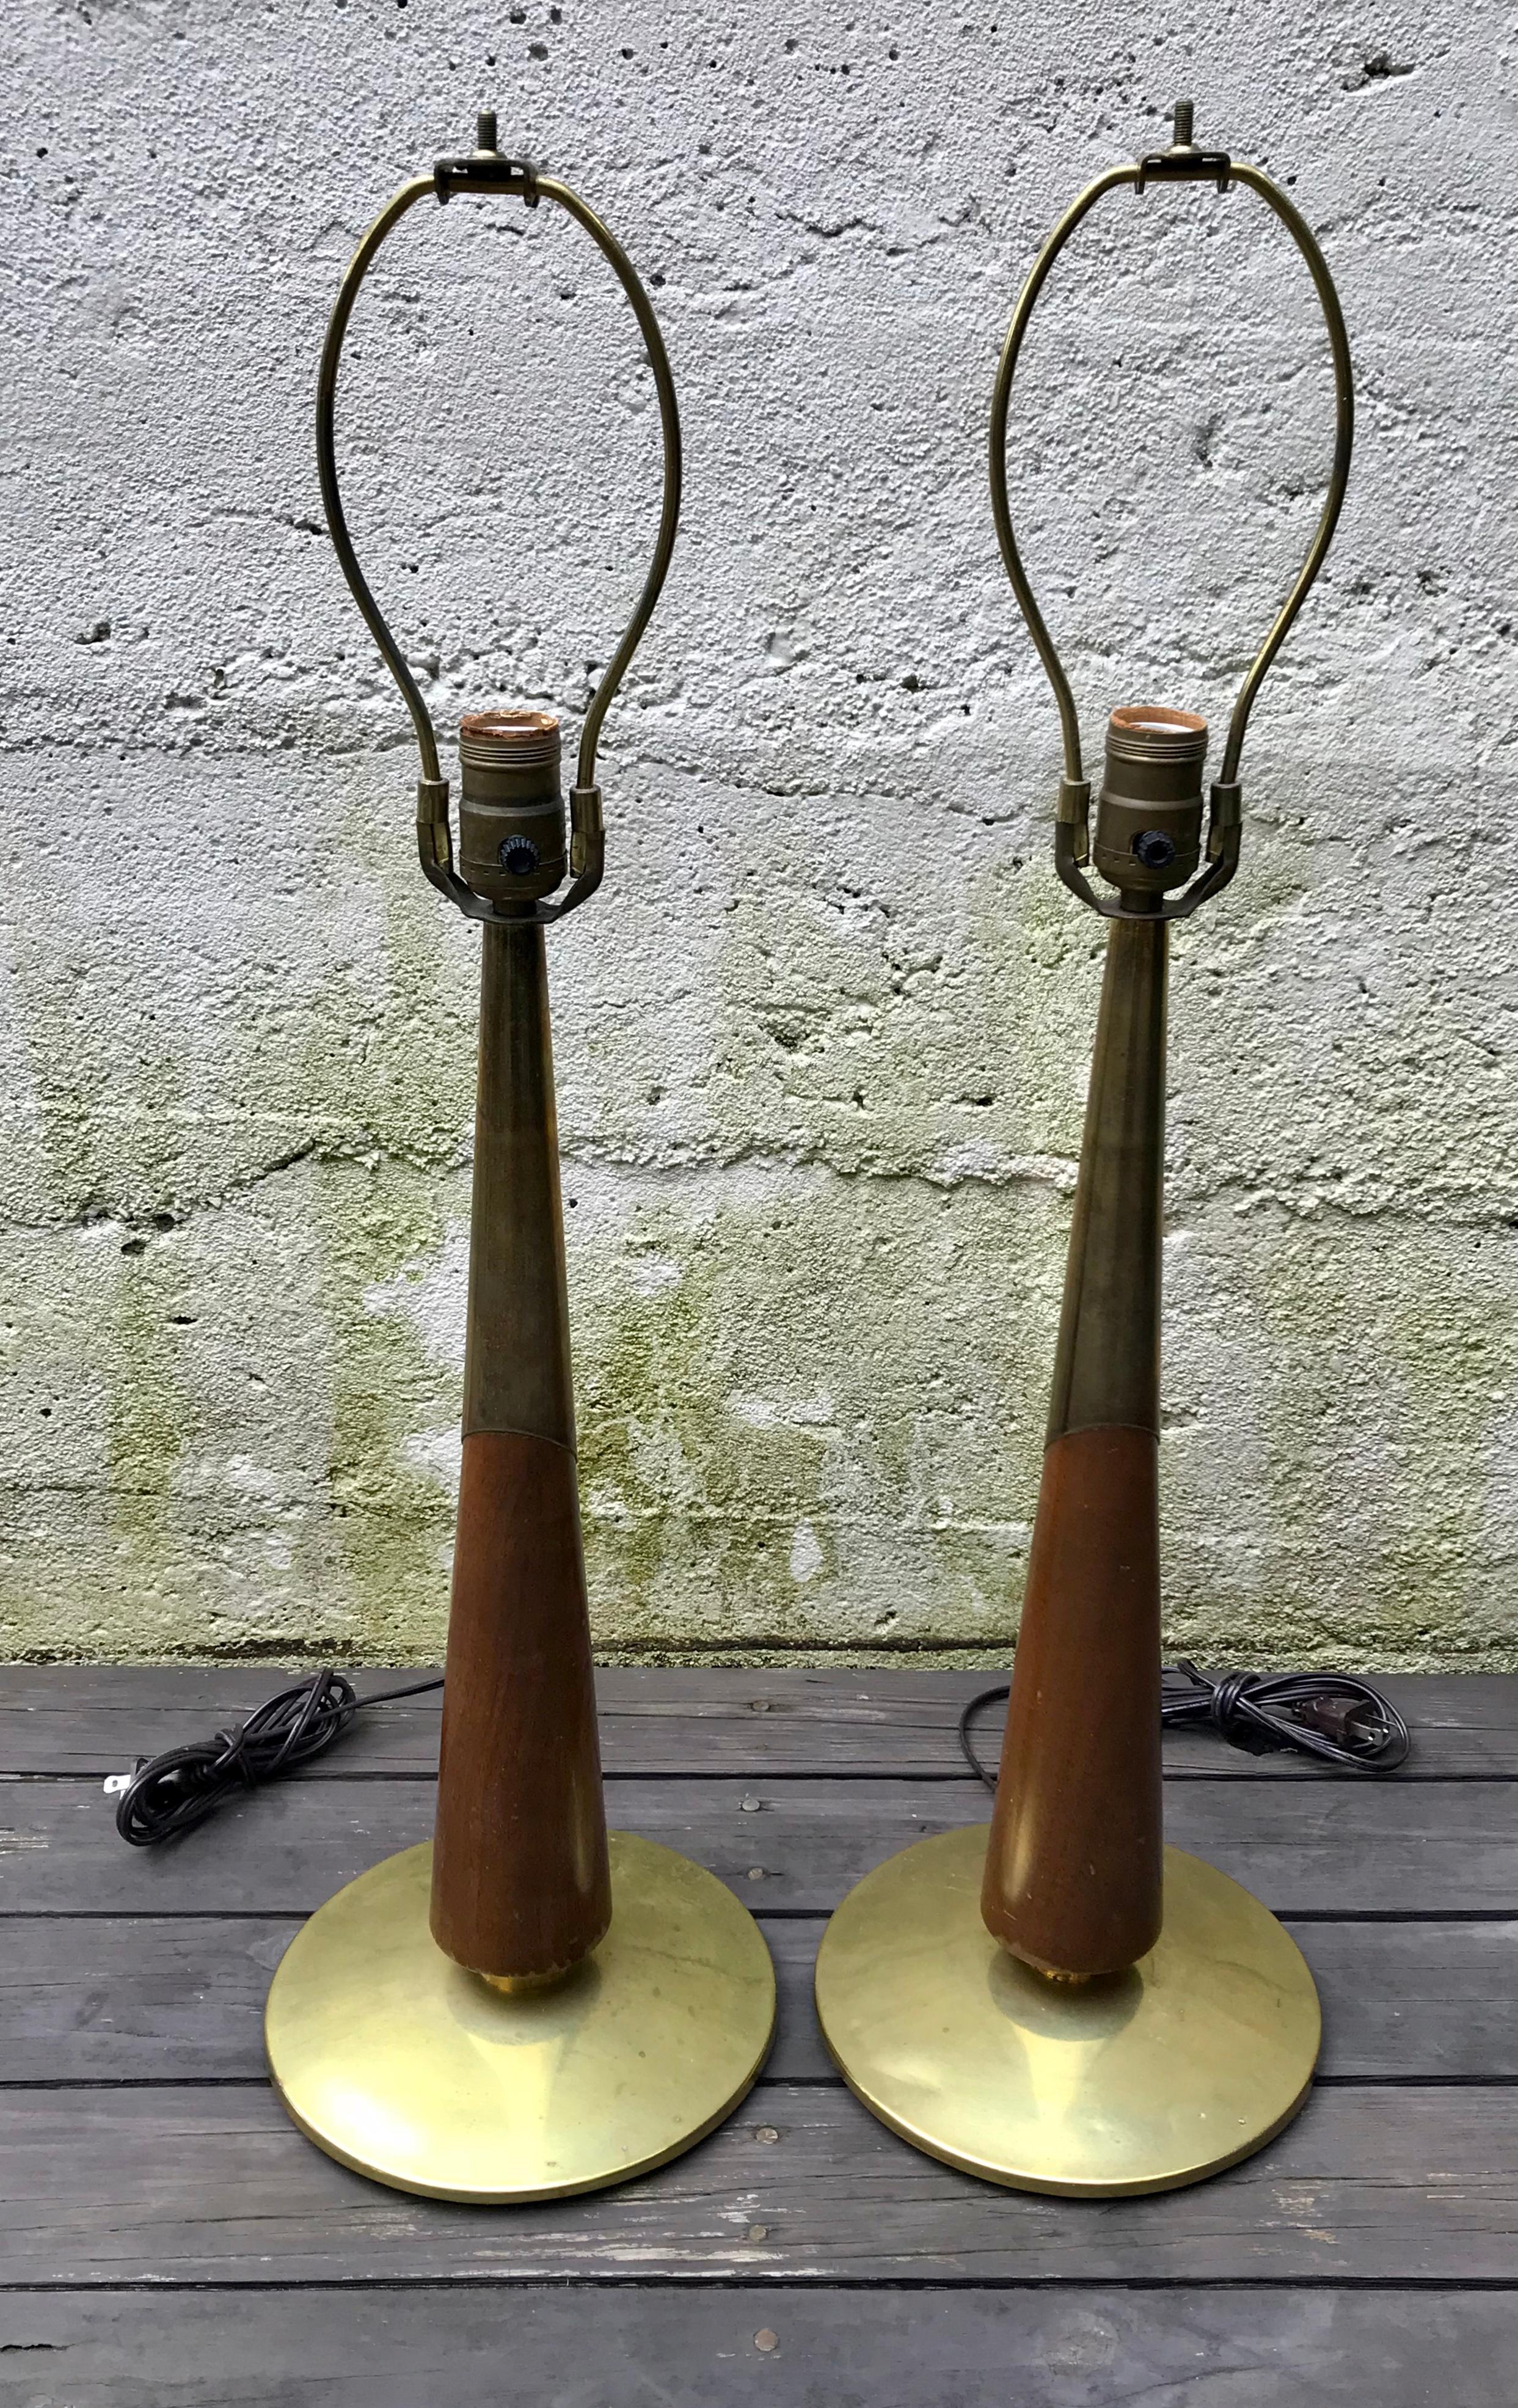 Mid-20th Century Pair of Midcentury Walnut and Brass Table Lamps by Laurel Lighting, 1950s